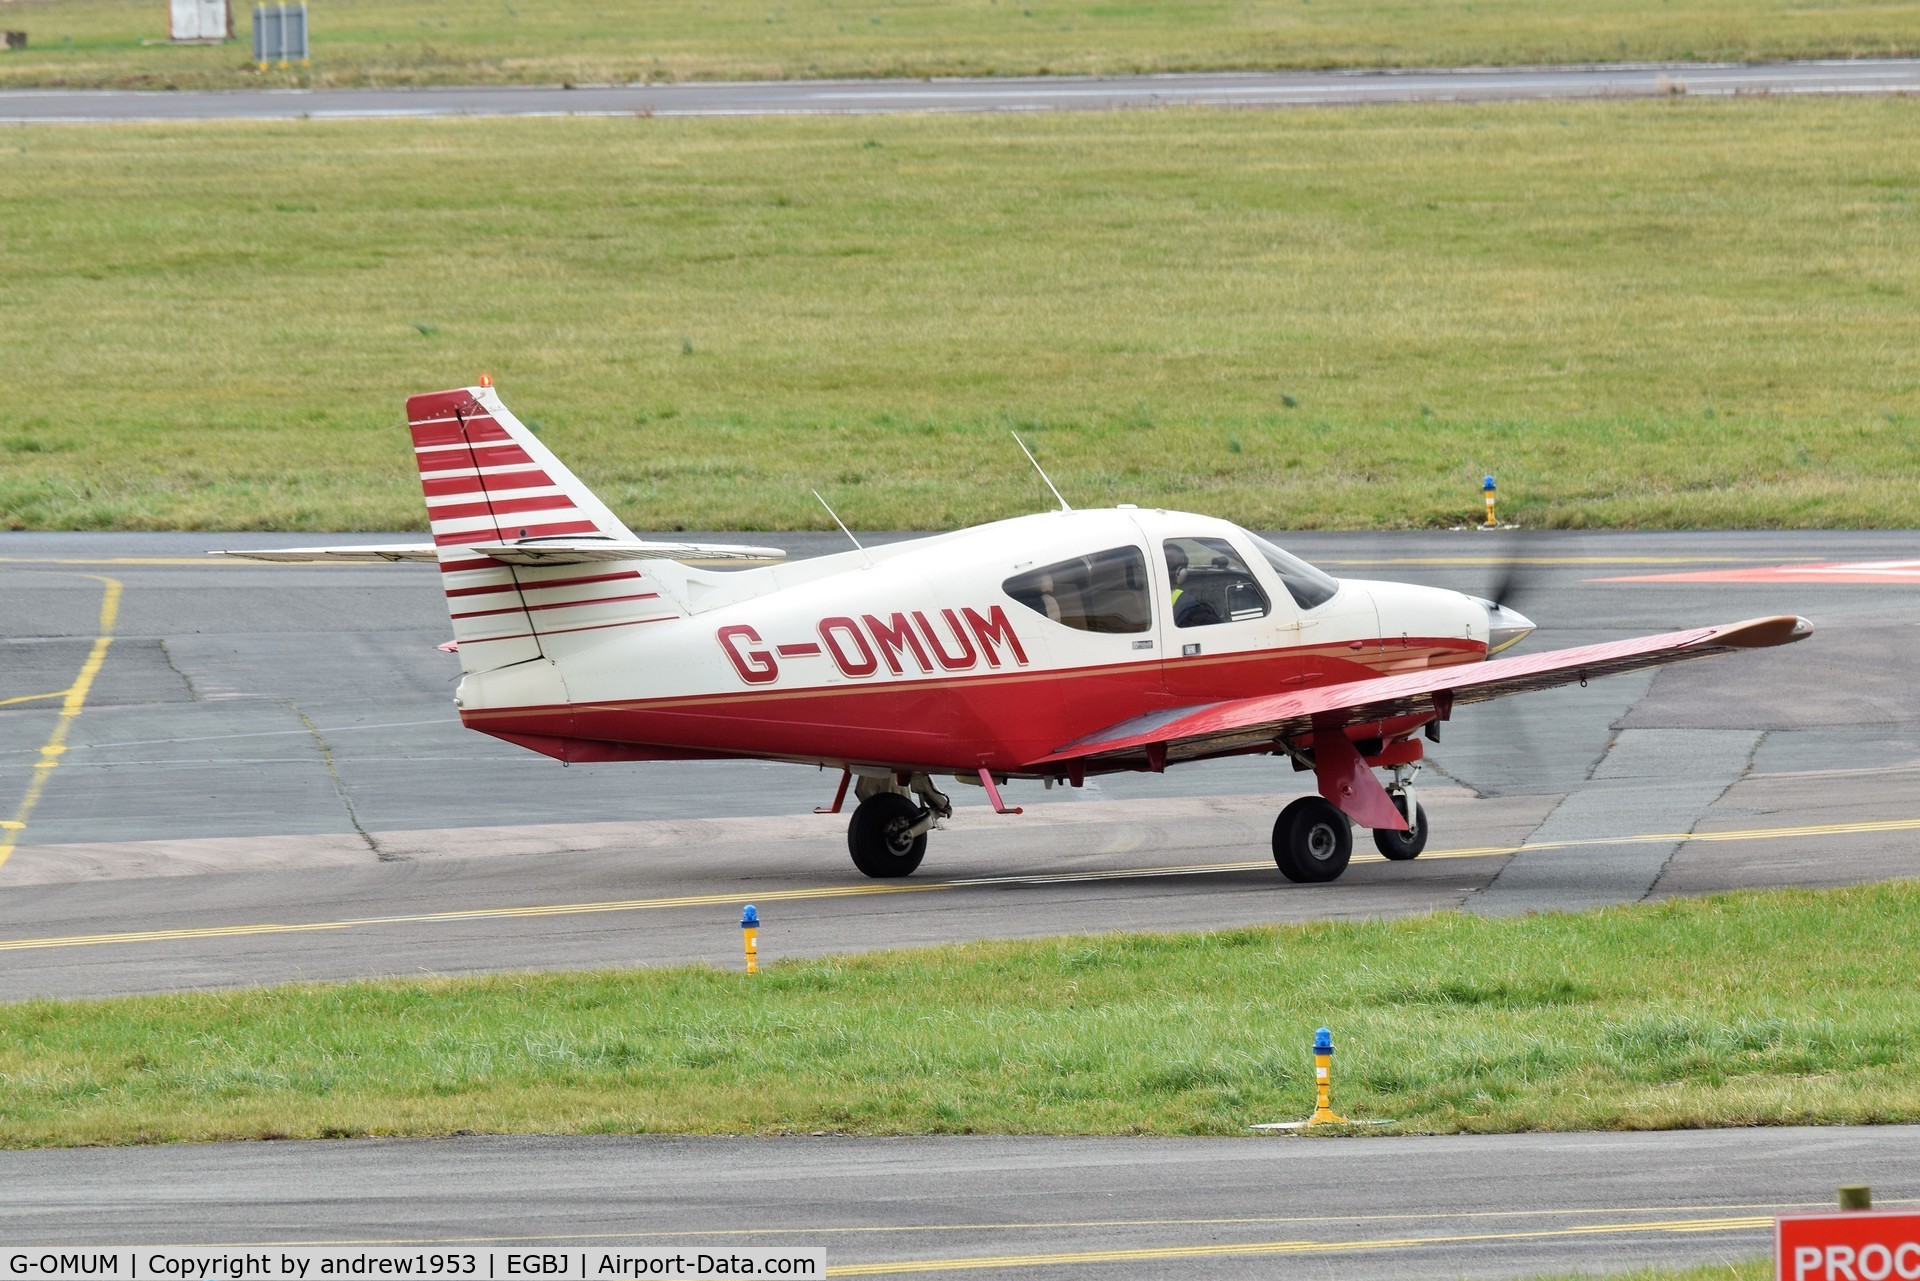 G-OMUM, 1976 Rockwell Commander 114 C/N 14067, G-OMUM at Gloucestershire Airport.